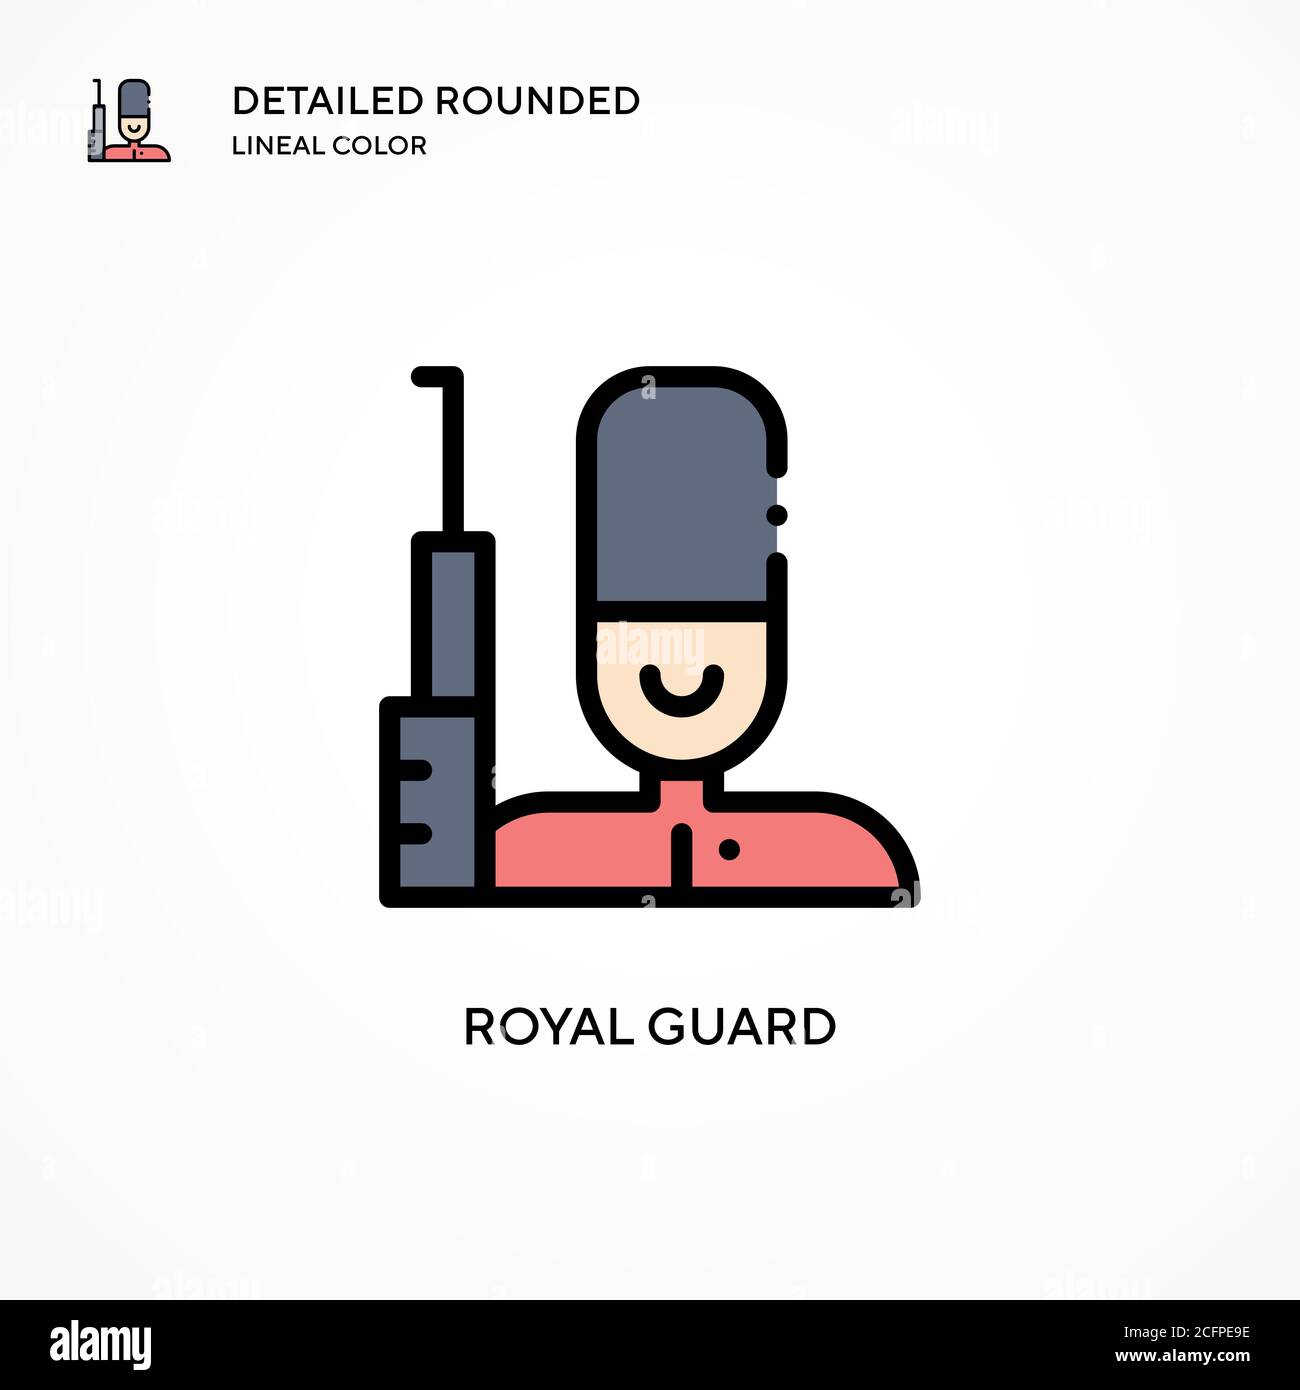 Royal guard vector icon. Modern vector illustration concepts. Easy to edit and customize. Stock Vector